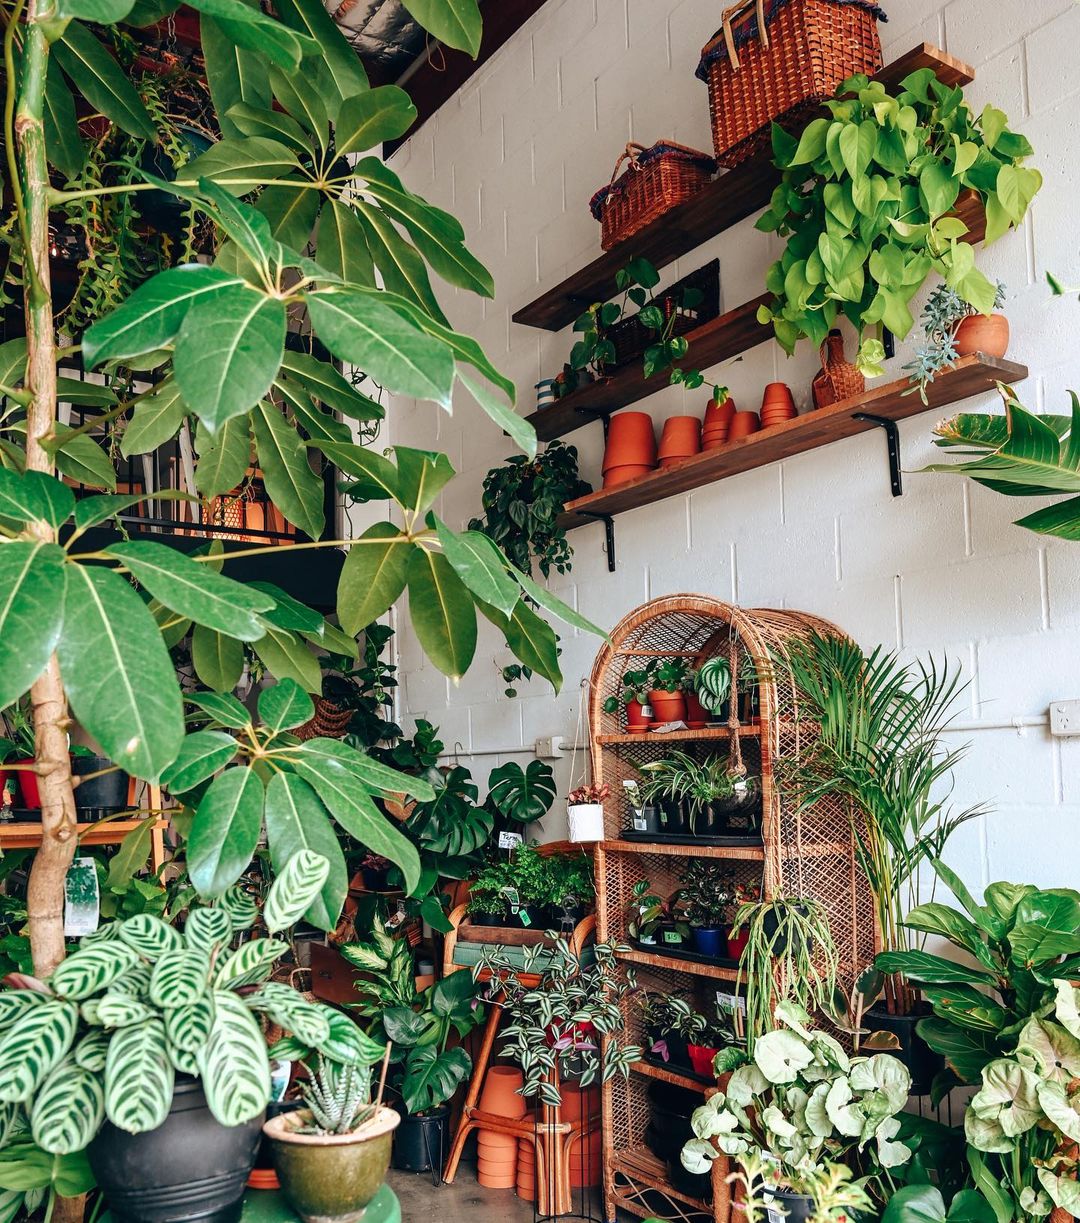 19 of the best nurseries and plant shops in brisbane | urban list